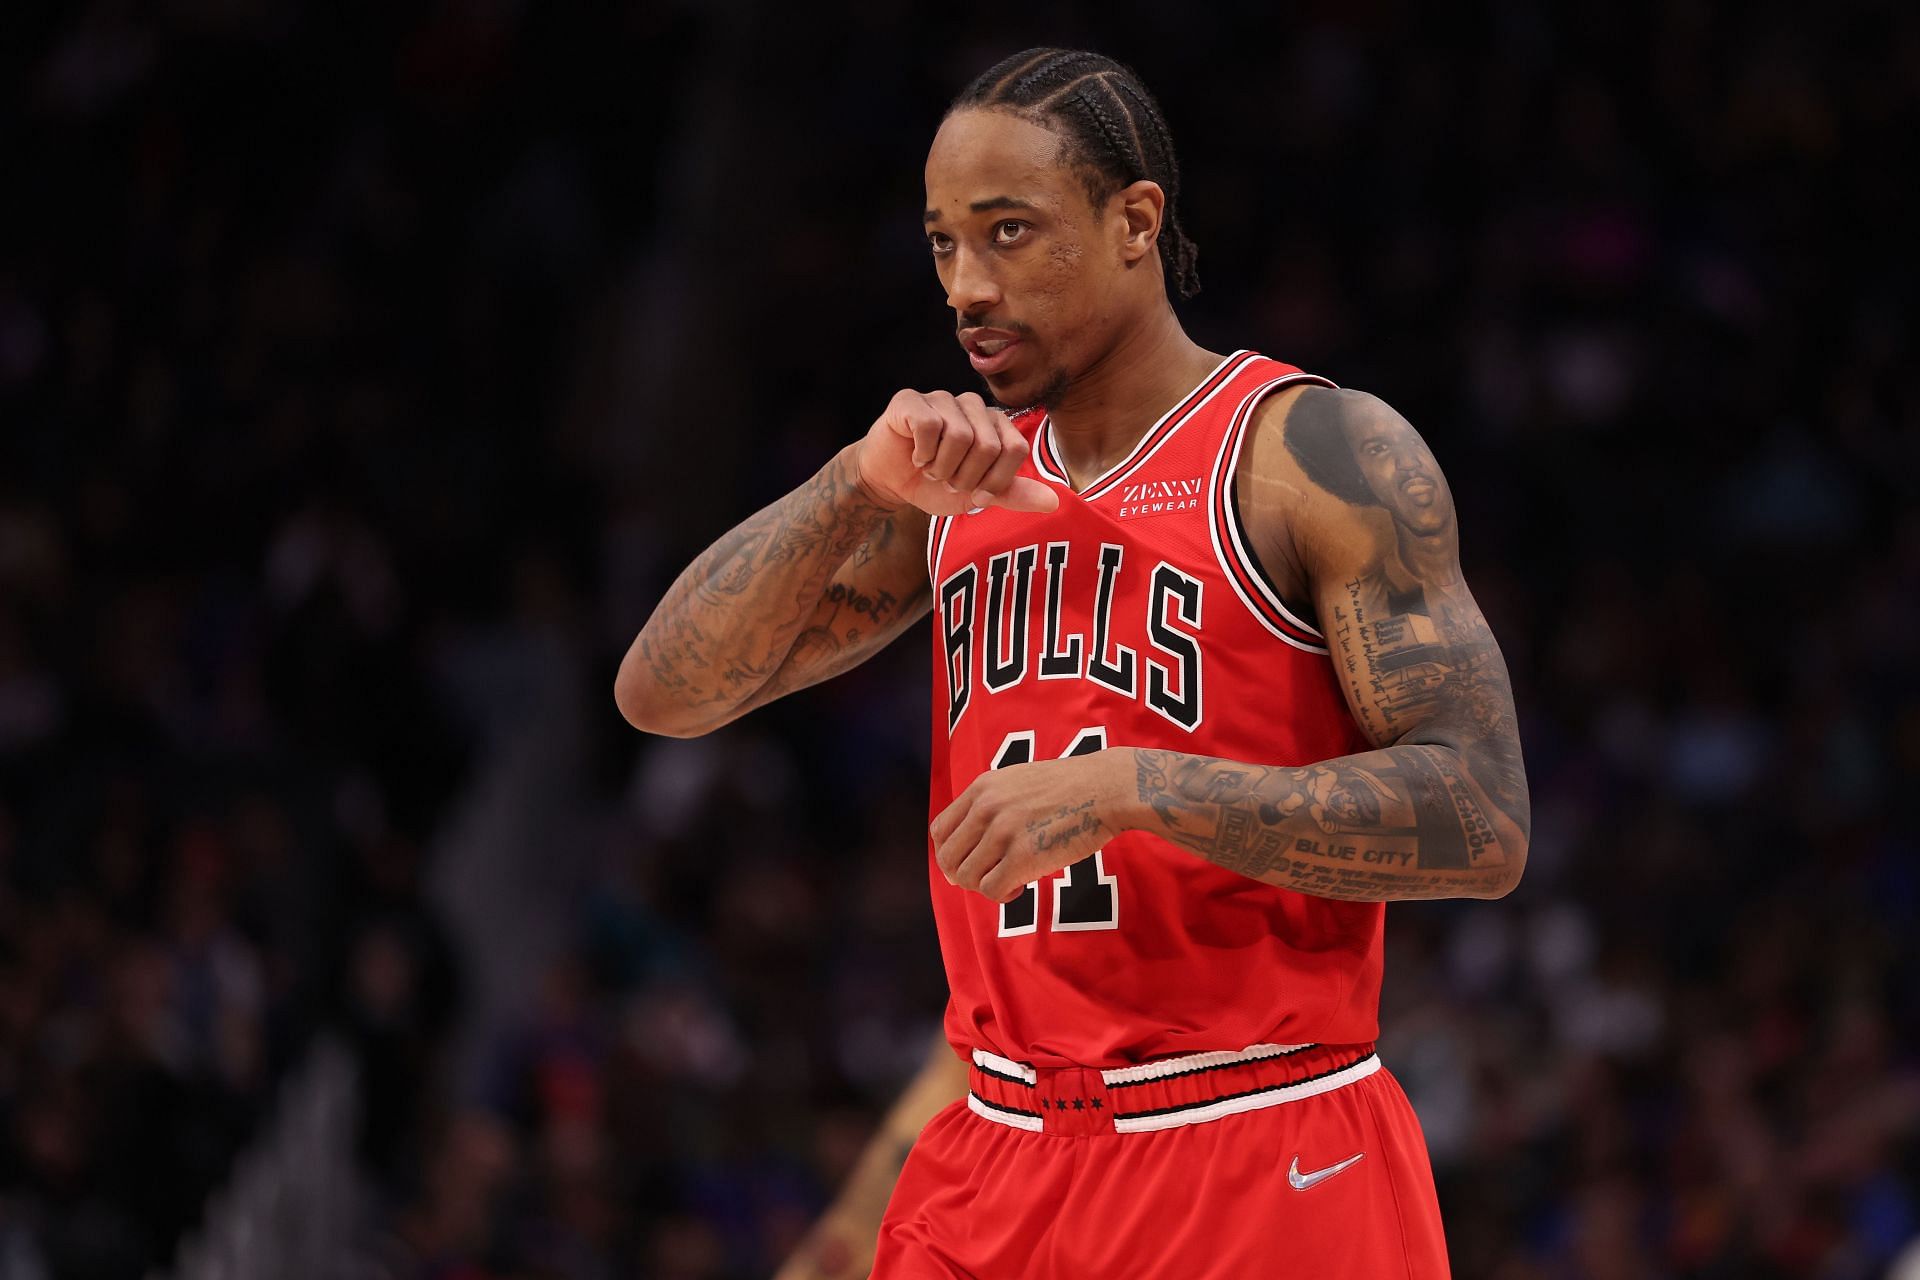 DeMar DeRozan suited up for the Chicago Bulls